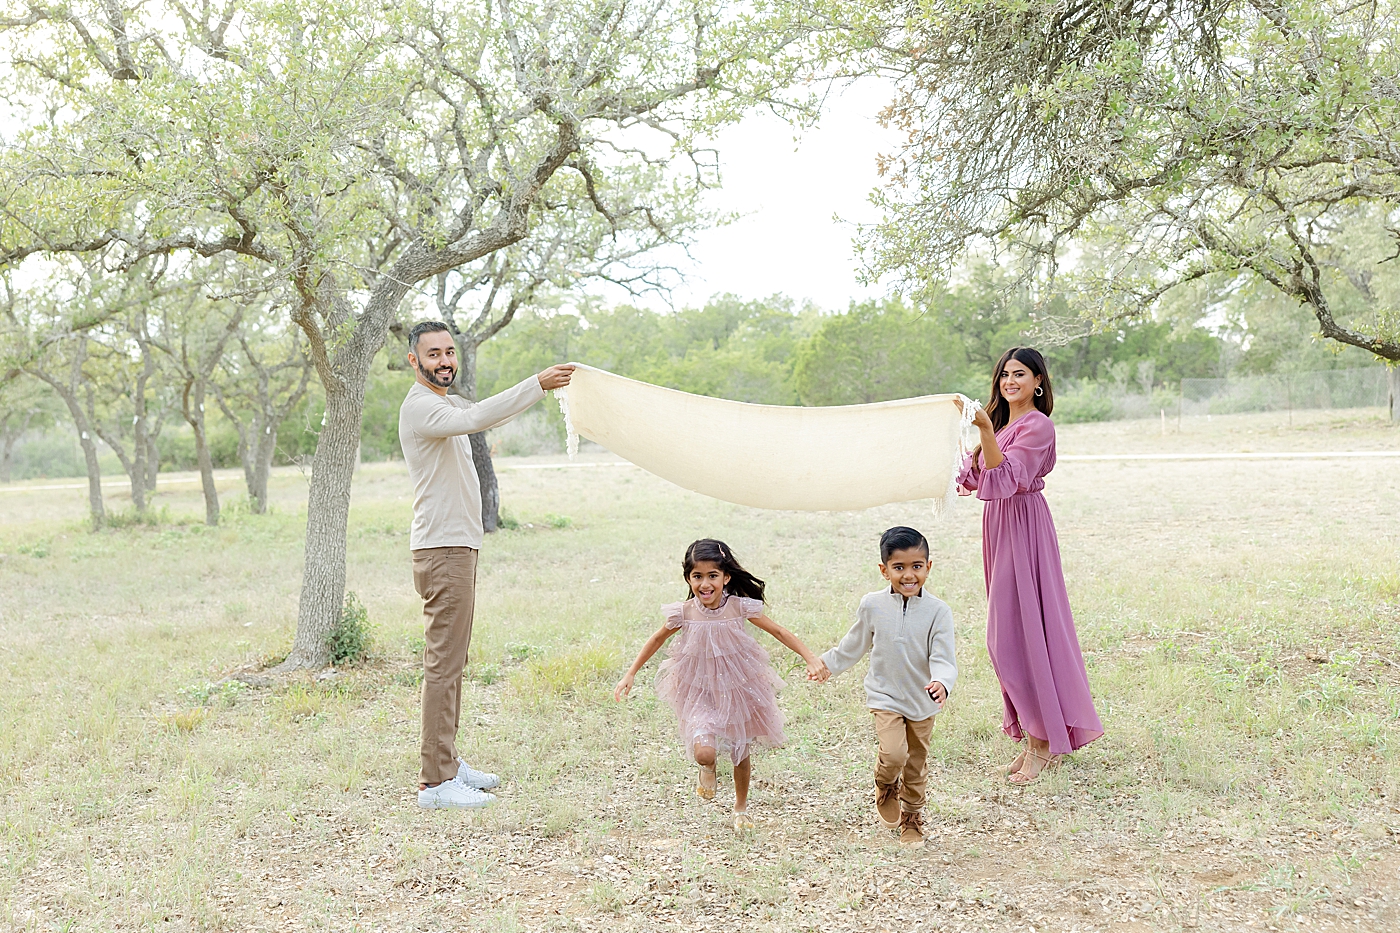 Mom and dad playing with their kids in the park | Image by Sana Ahmed Photography